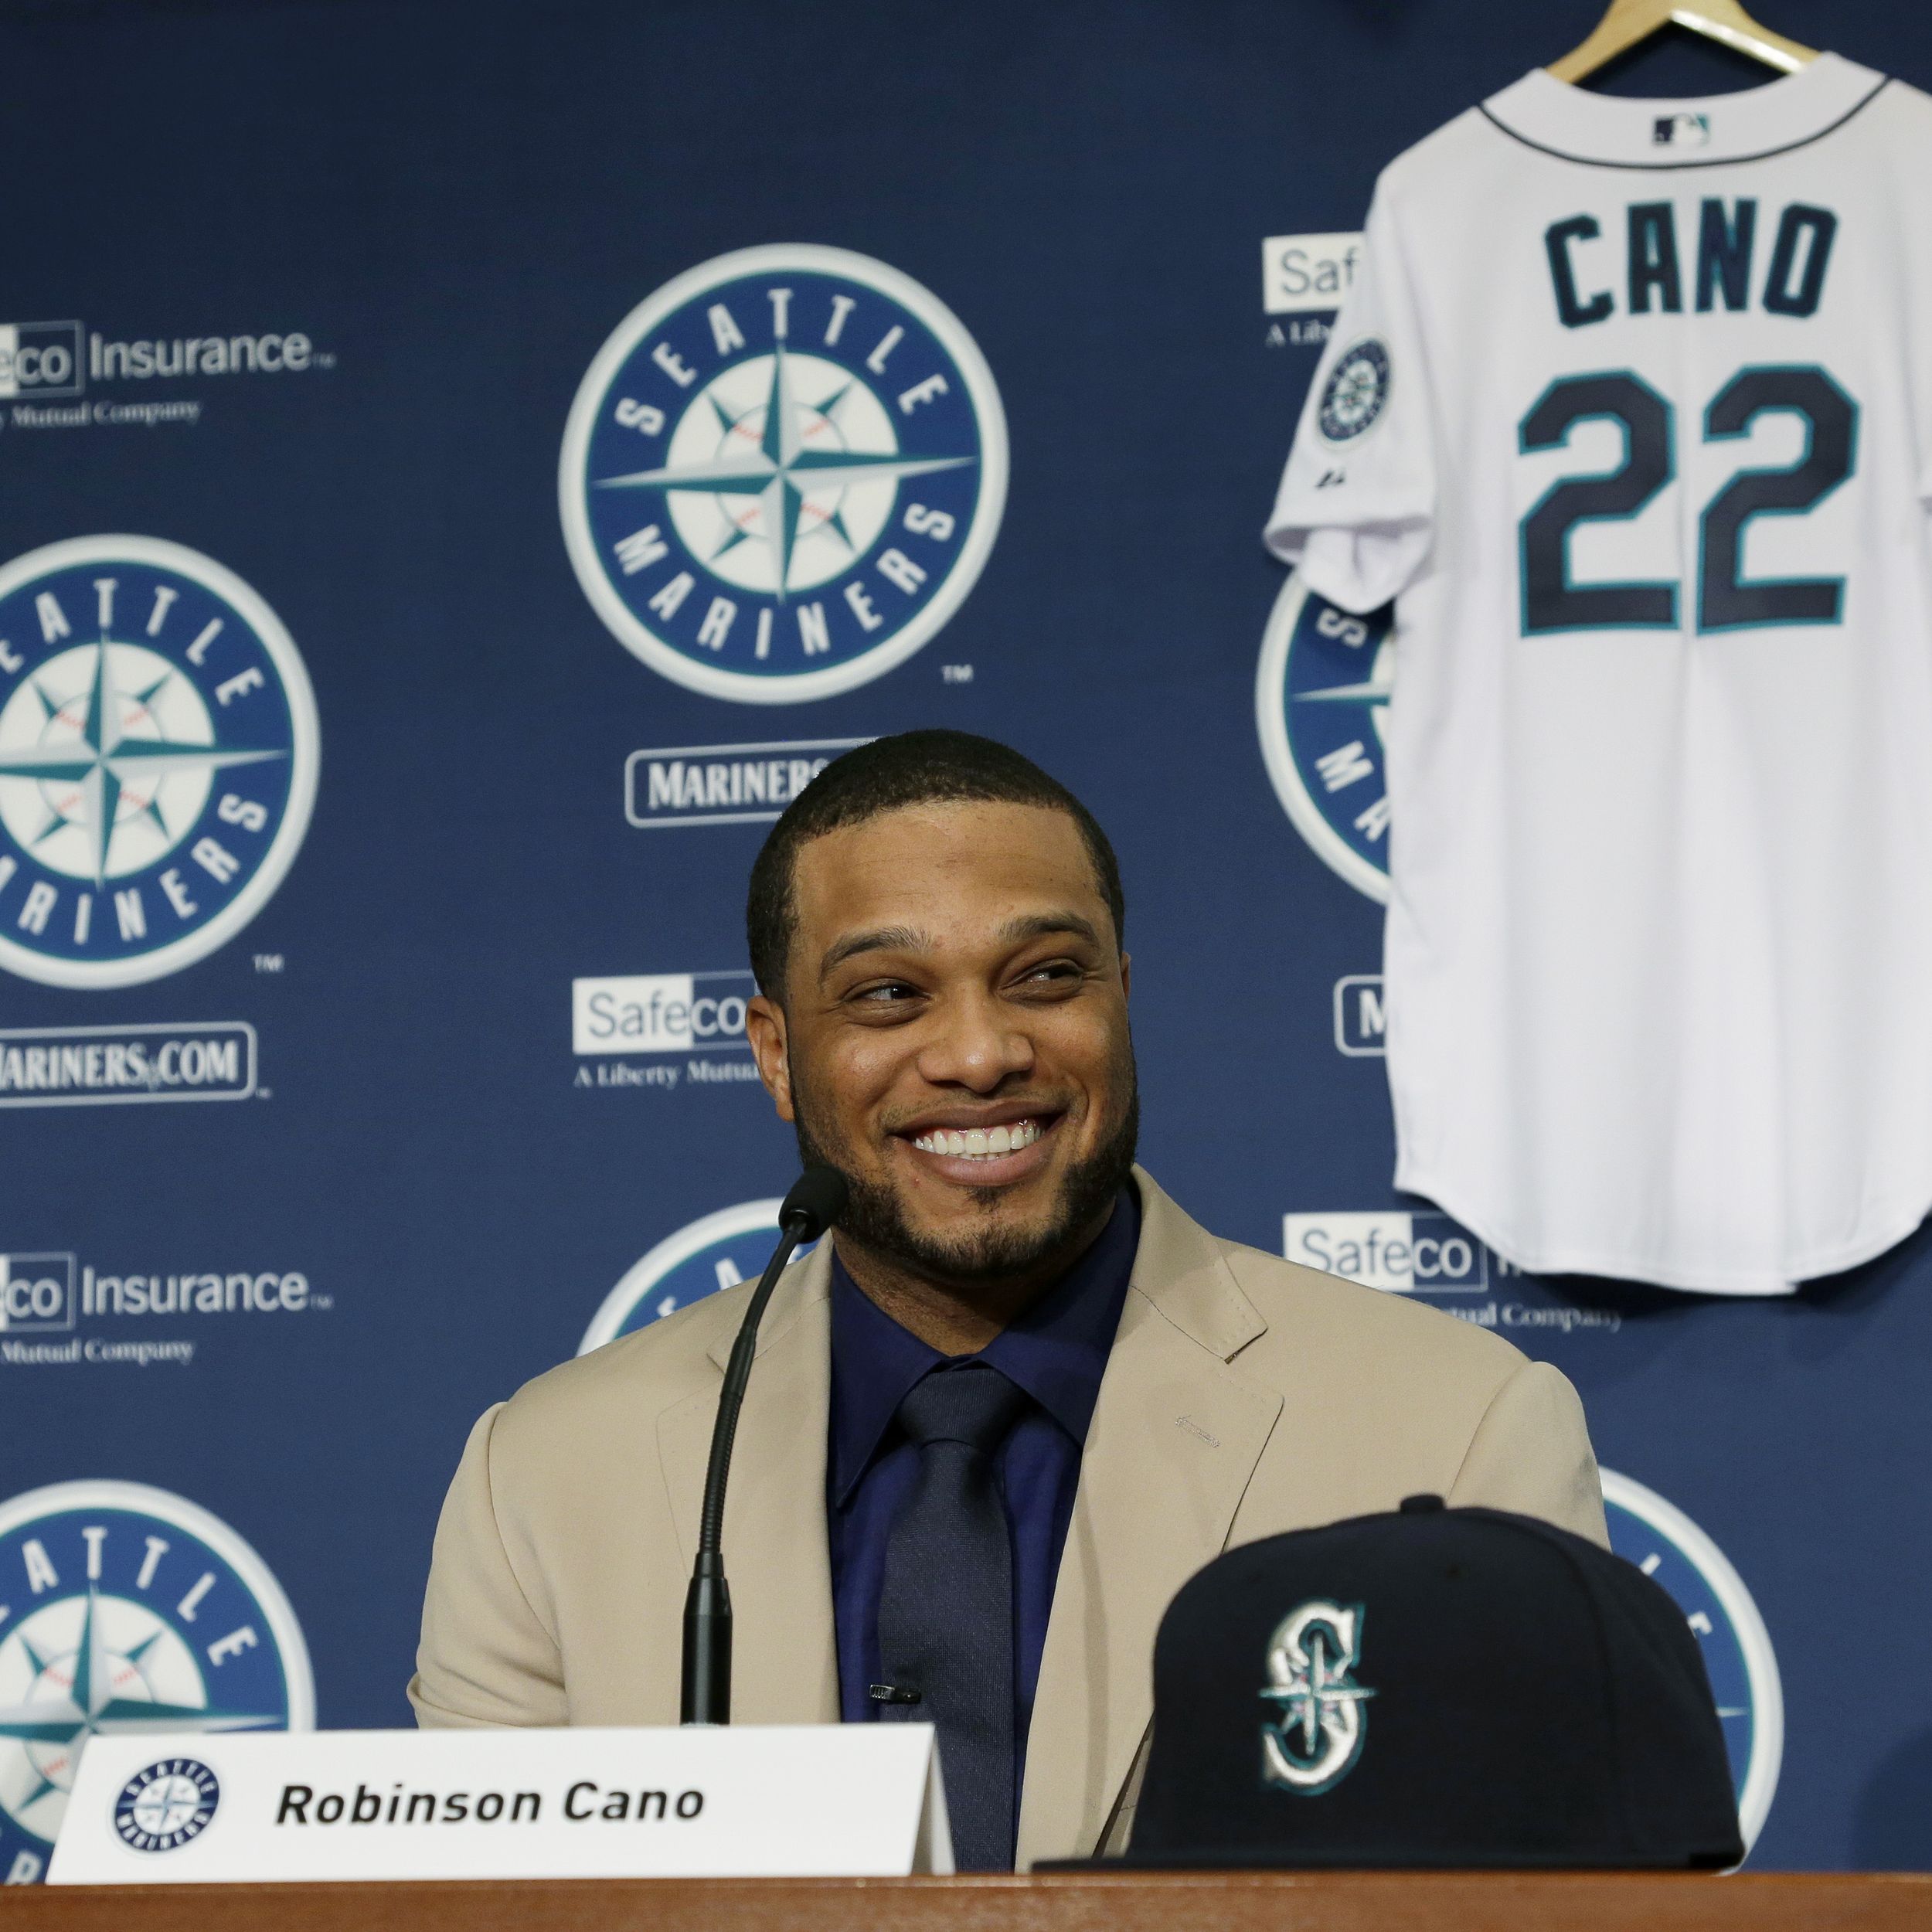 Robinson Cano spurns Yankees for Mariners - Los Angeles Times